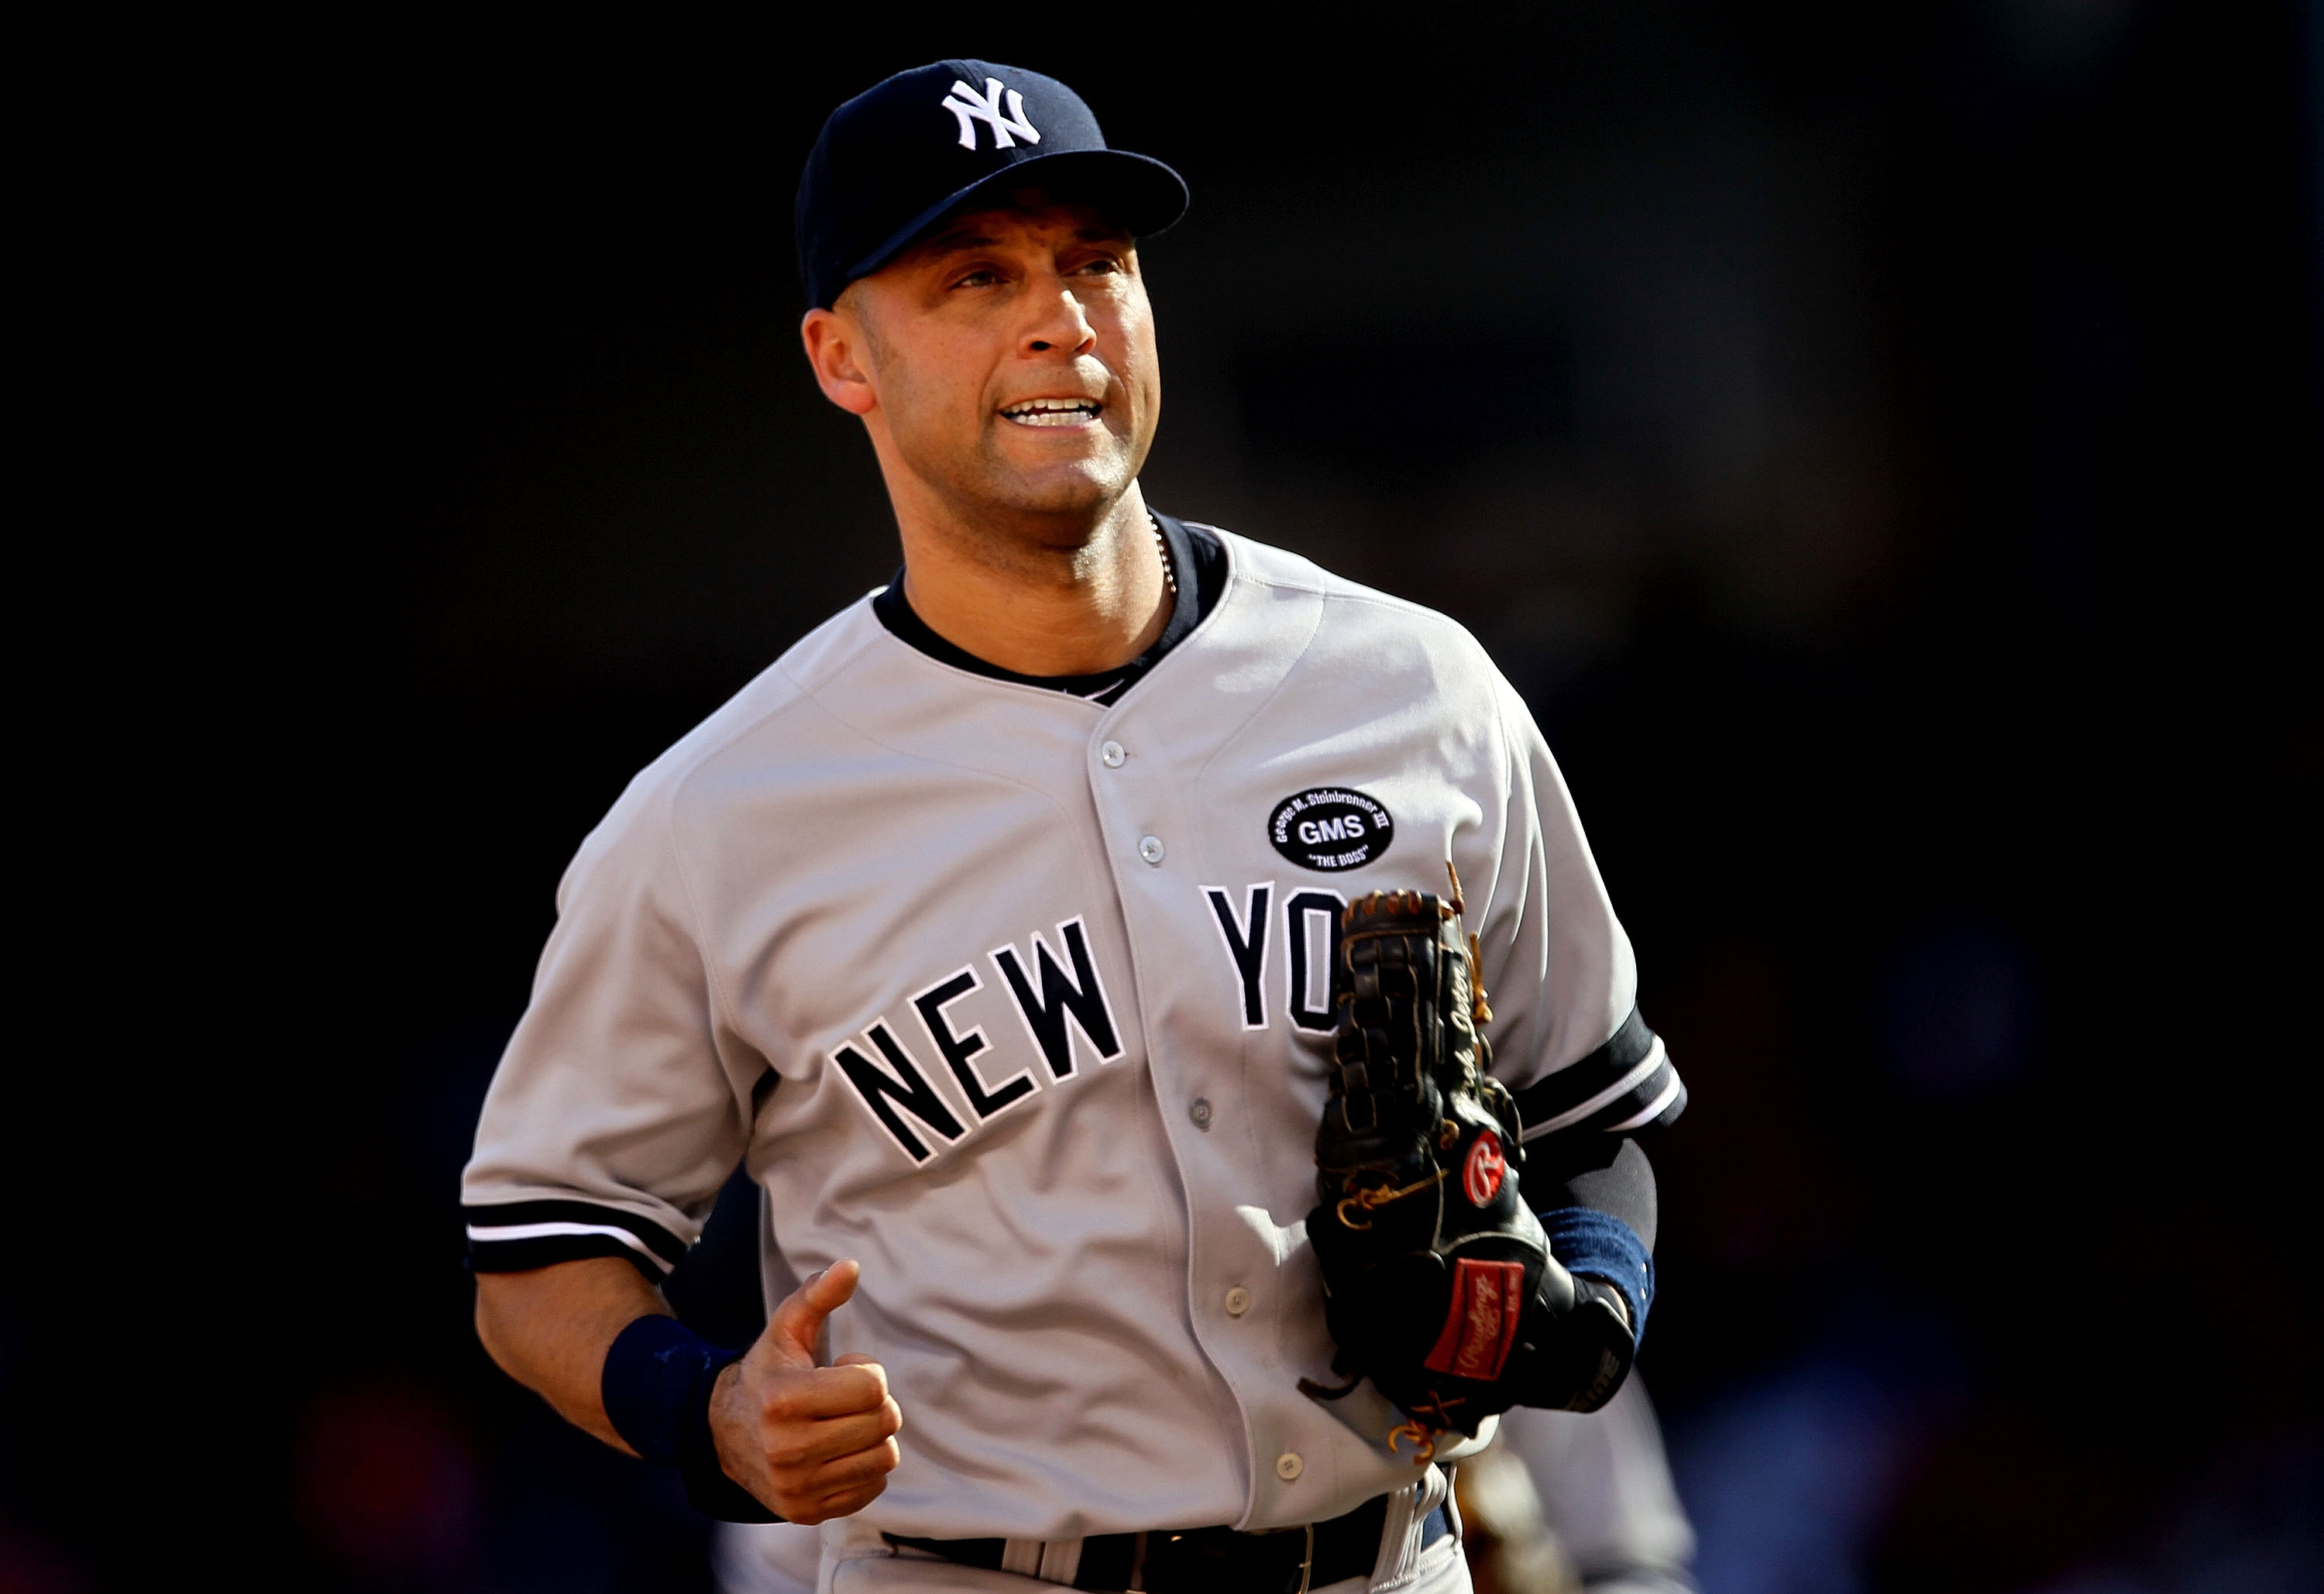 ARLINGTON, TX - OCTOBER 16:  Derek Jeter #2 of the New York Yankees looks on against the Texas Rangers in Game Two of the ALCS during the 2010 MLB Playoffs at Rangers Ballpark in Arlington on October 16, 2010 in Arlington, Texas.  (Photo by Stephen Dunn/G